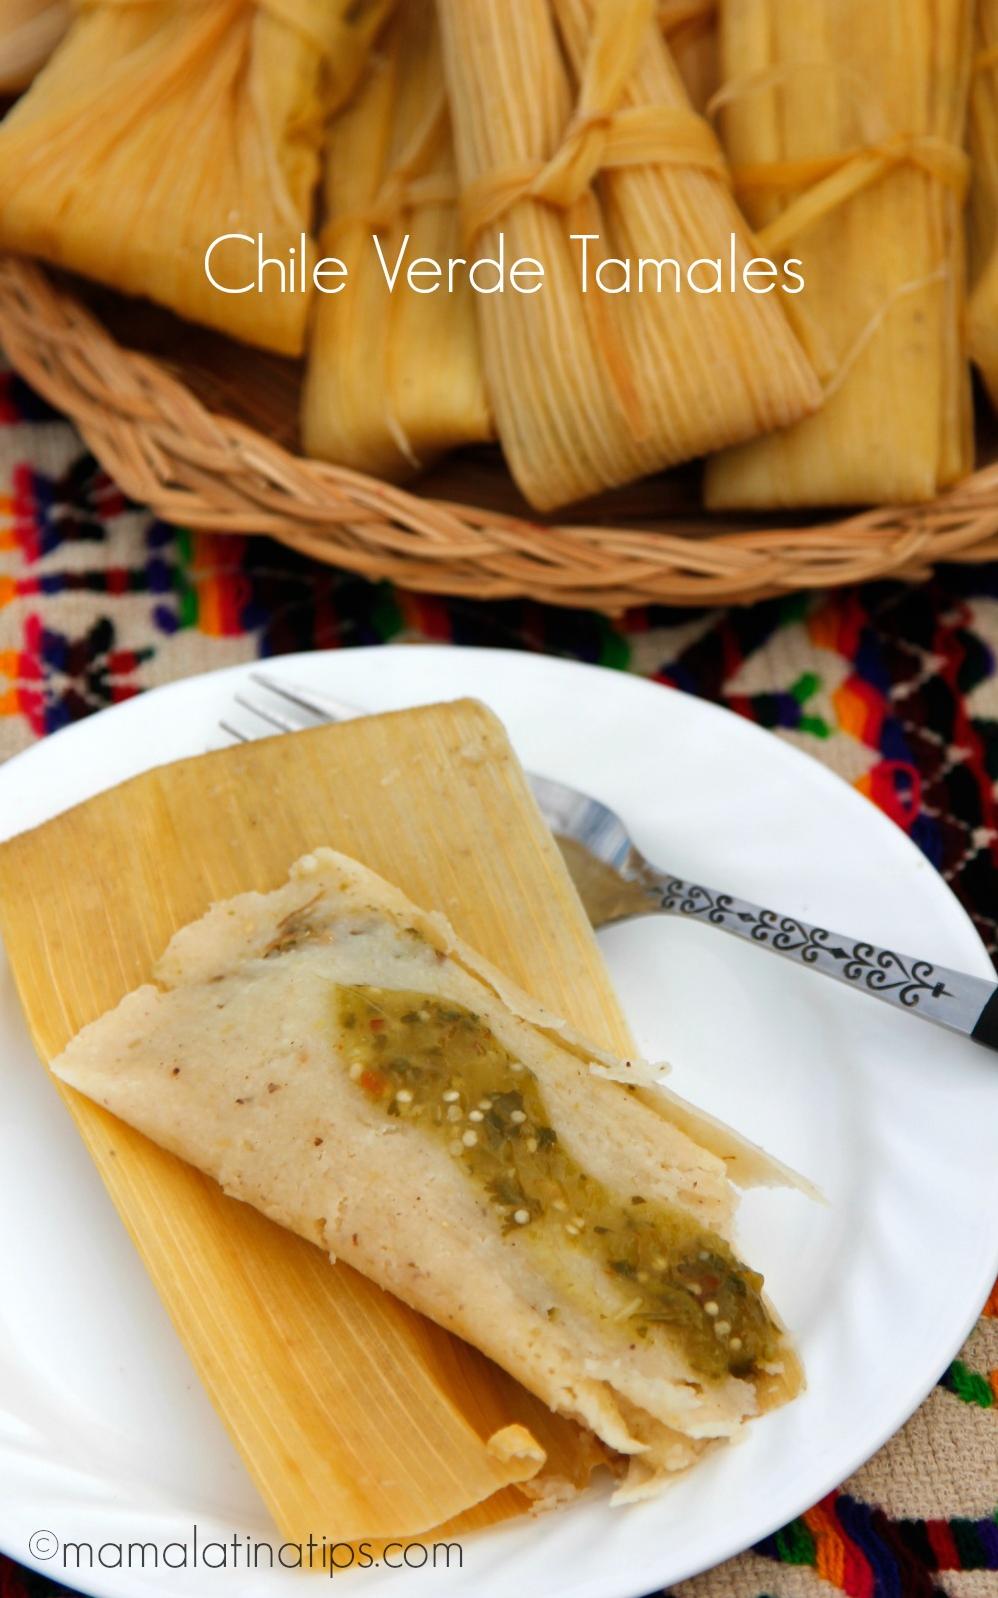  One look at these tamales and your mouth will water.